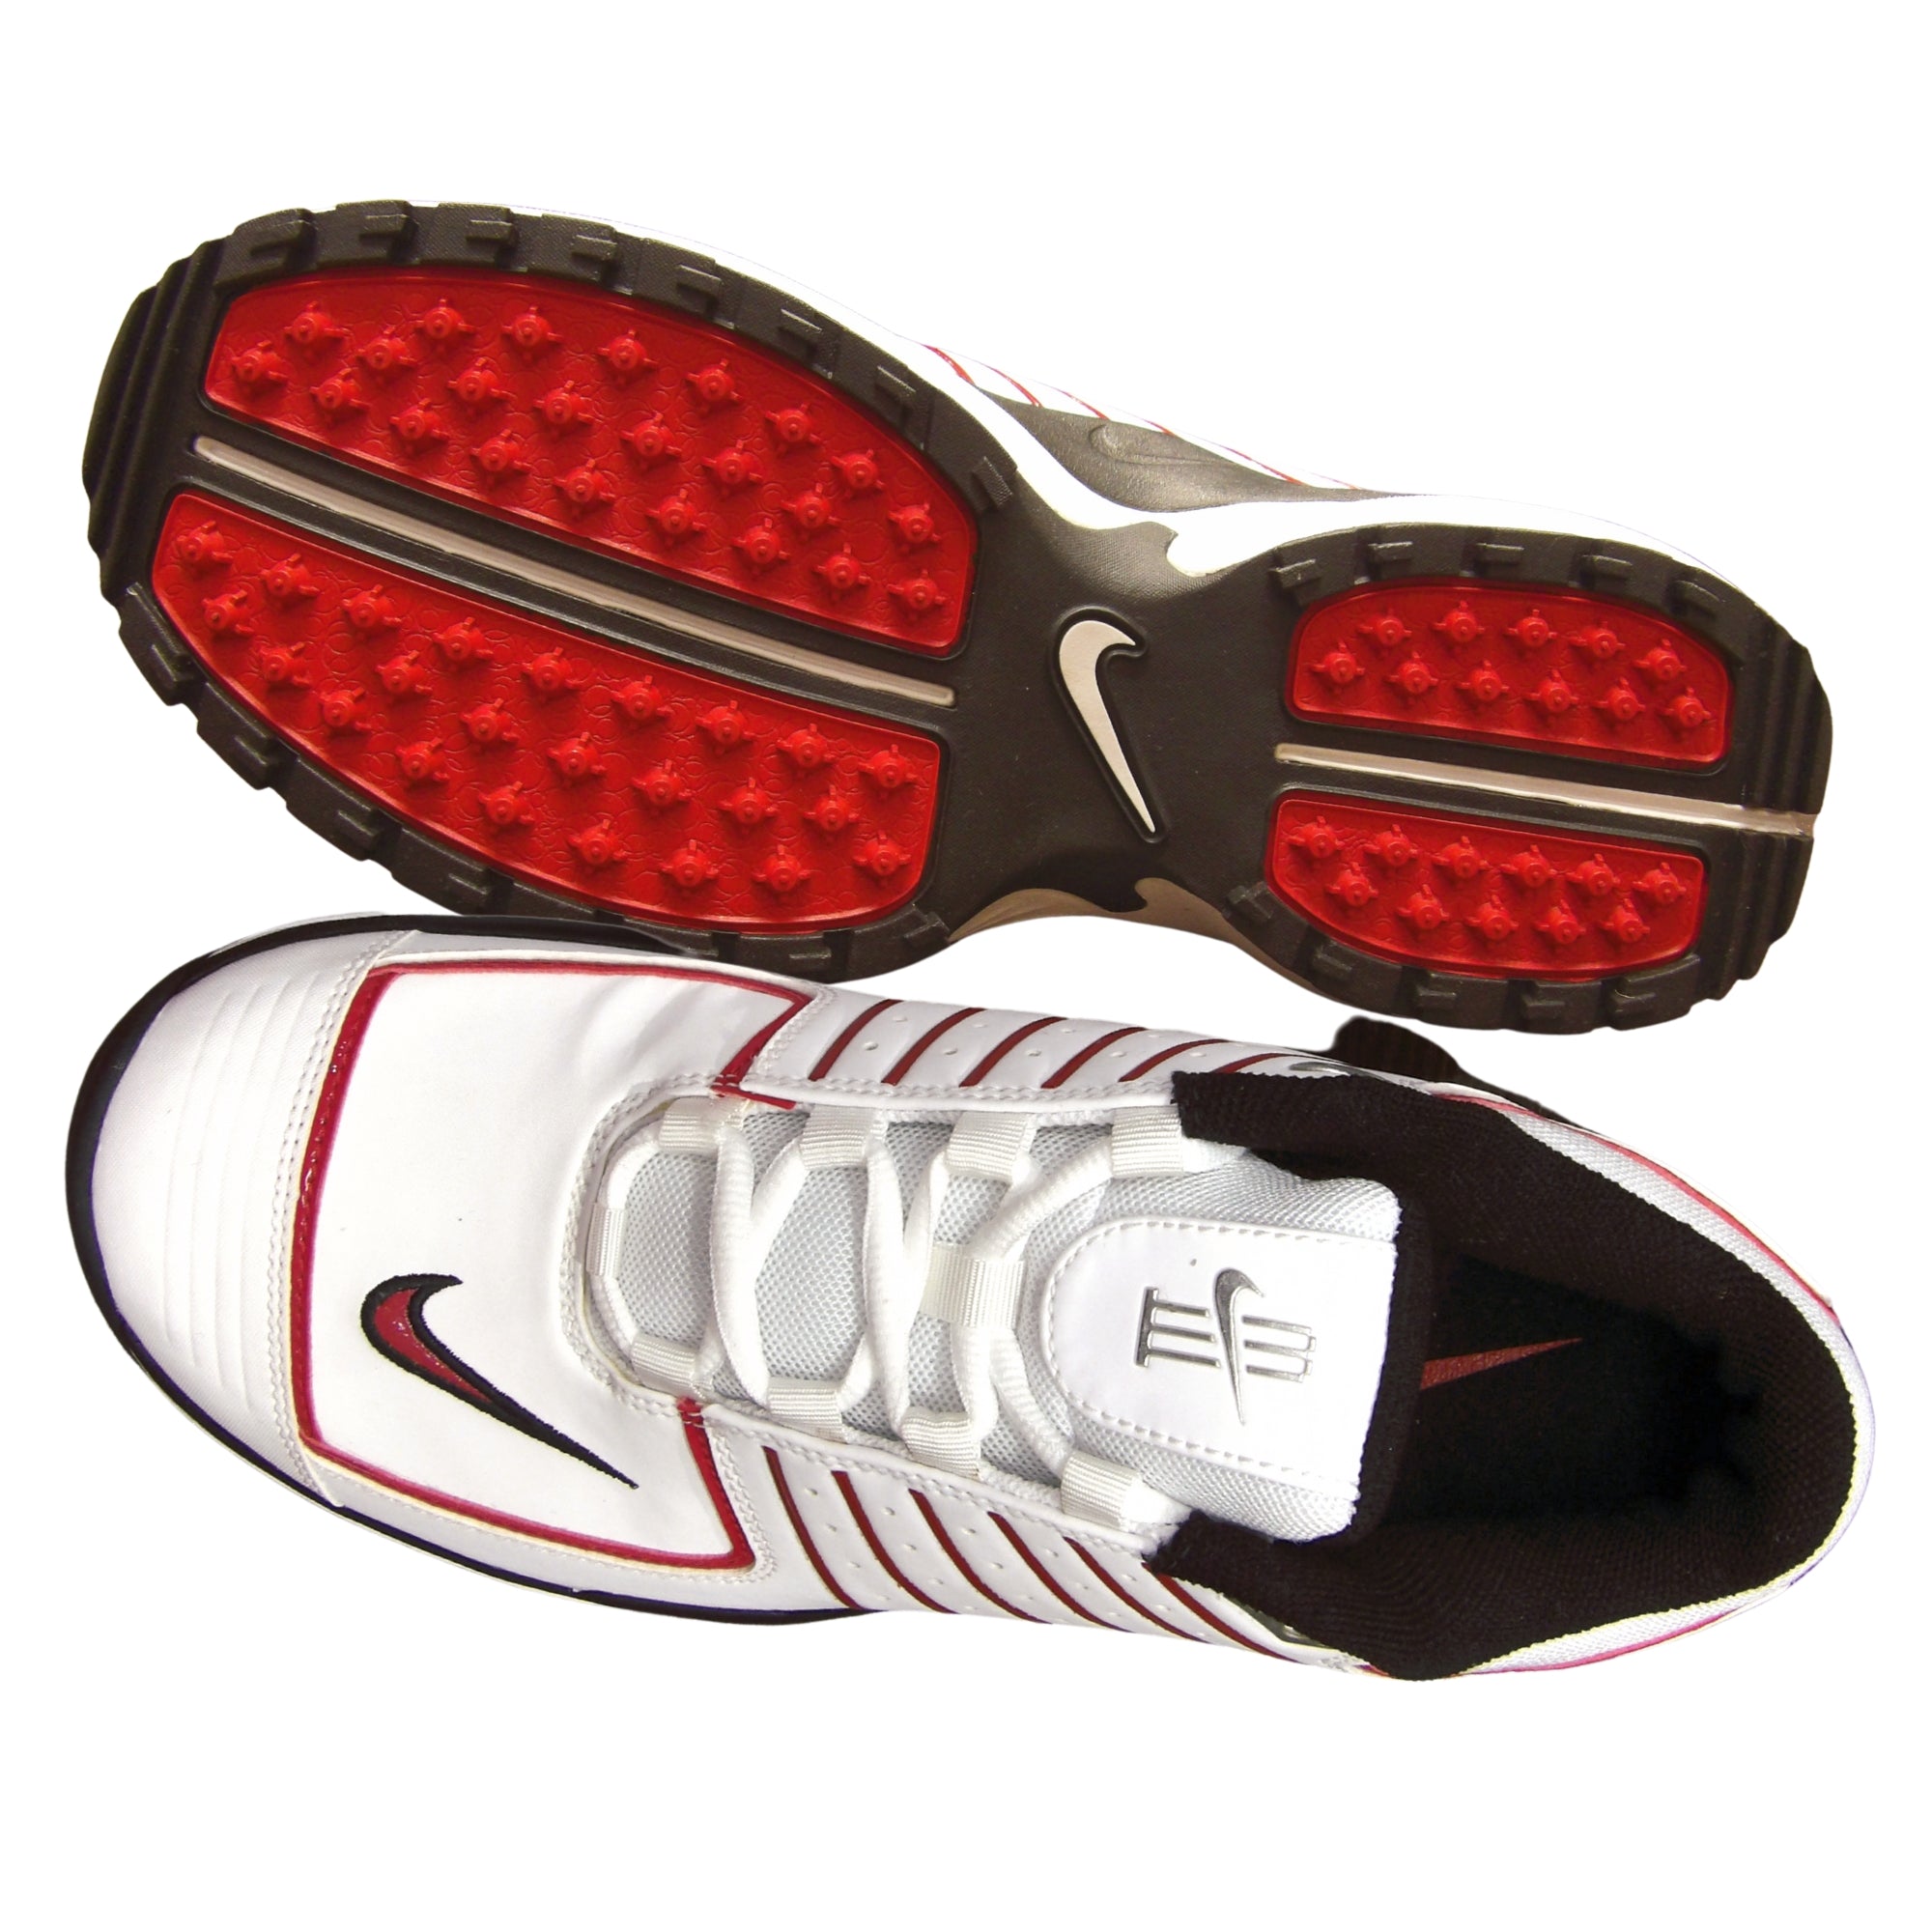 Nike Cricket Shoes, Model Air Max Go - White/Red